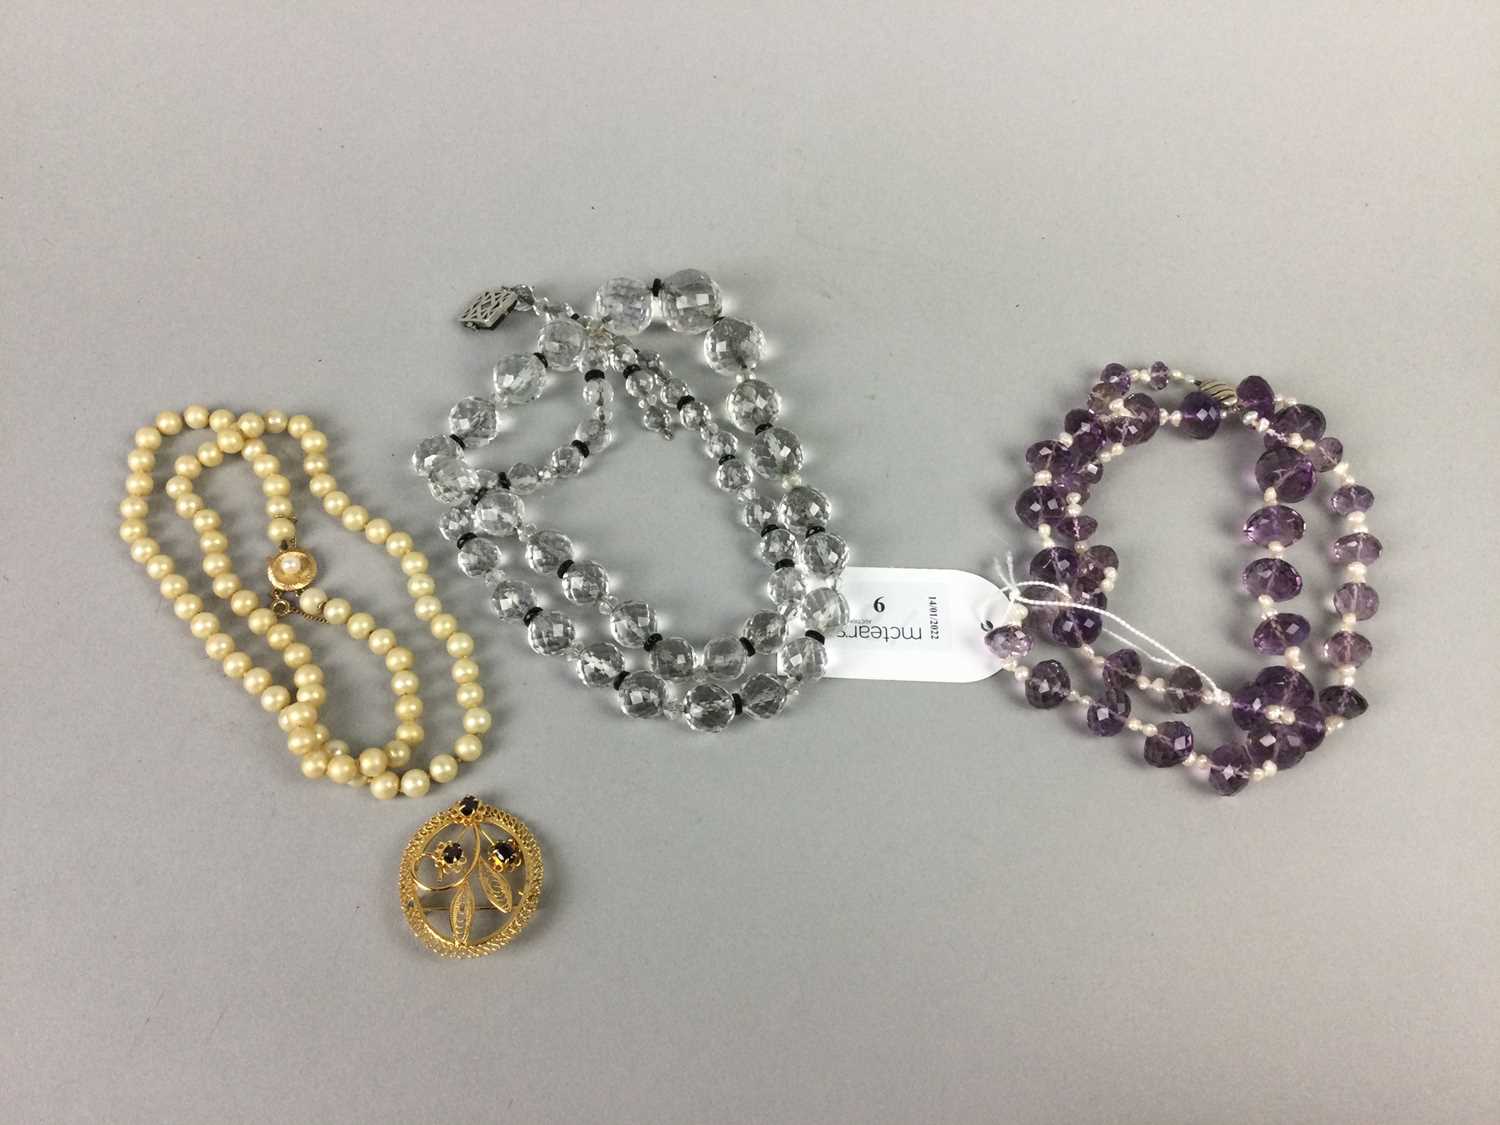 A SIMULATED PEARL NECKLACE AND OTHER JEWELLERY